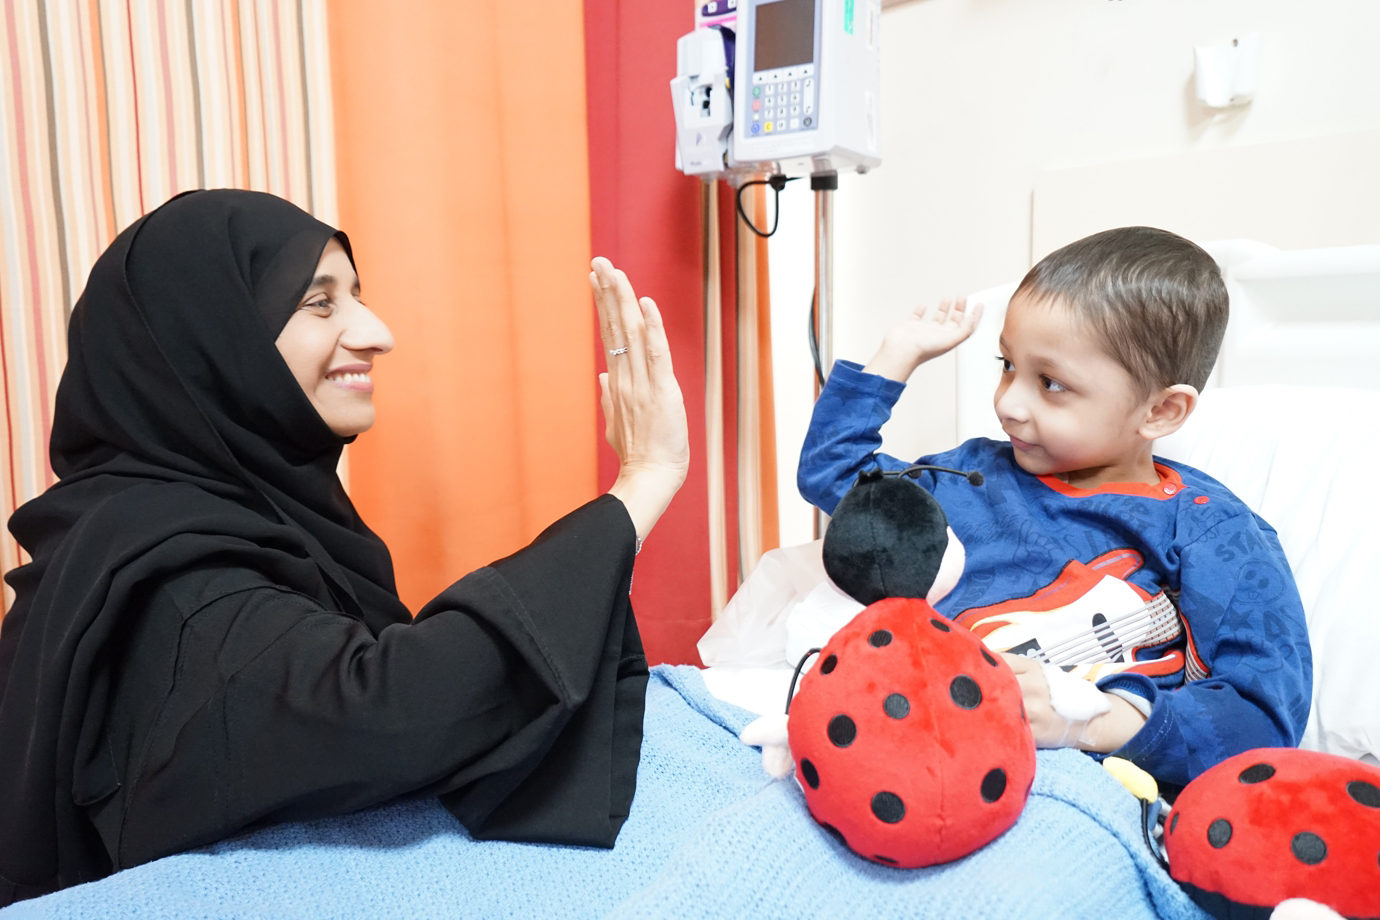 Healthcare crowdfunding in Dubai gets a strong push with the success of Al Jalila Foundation’s A’awen Giving platform